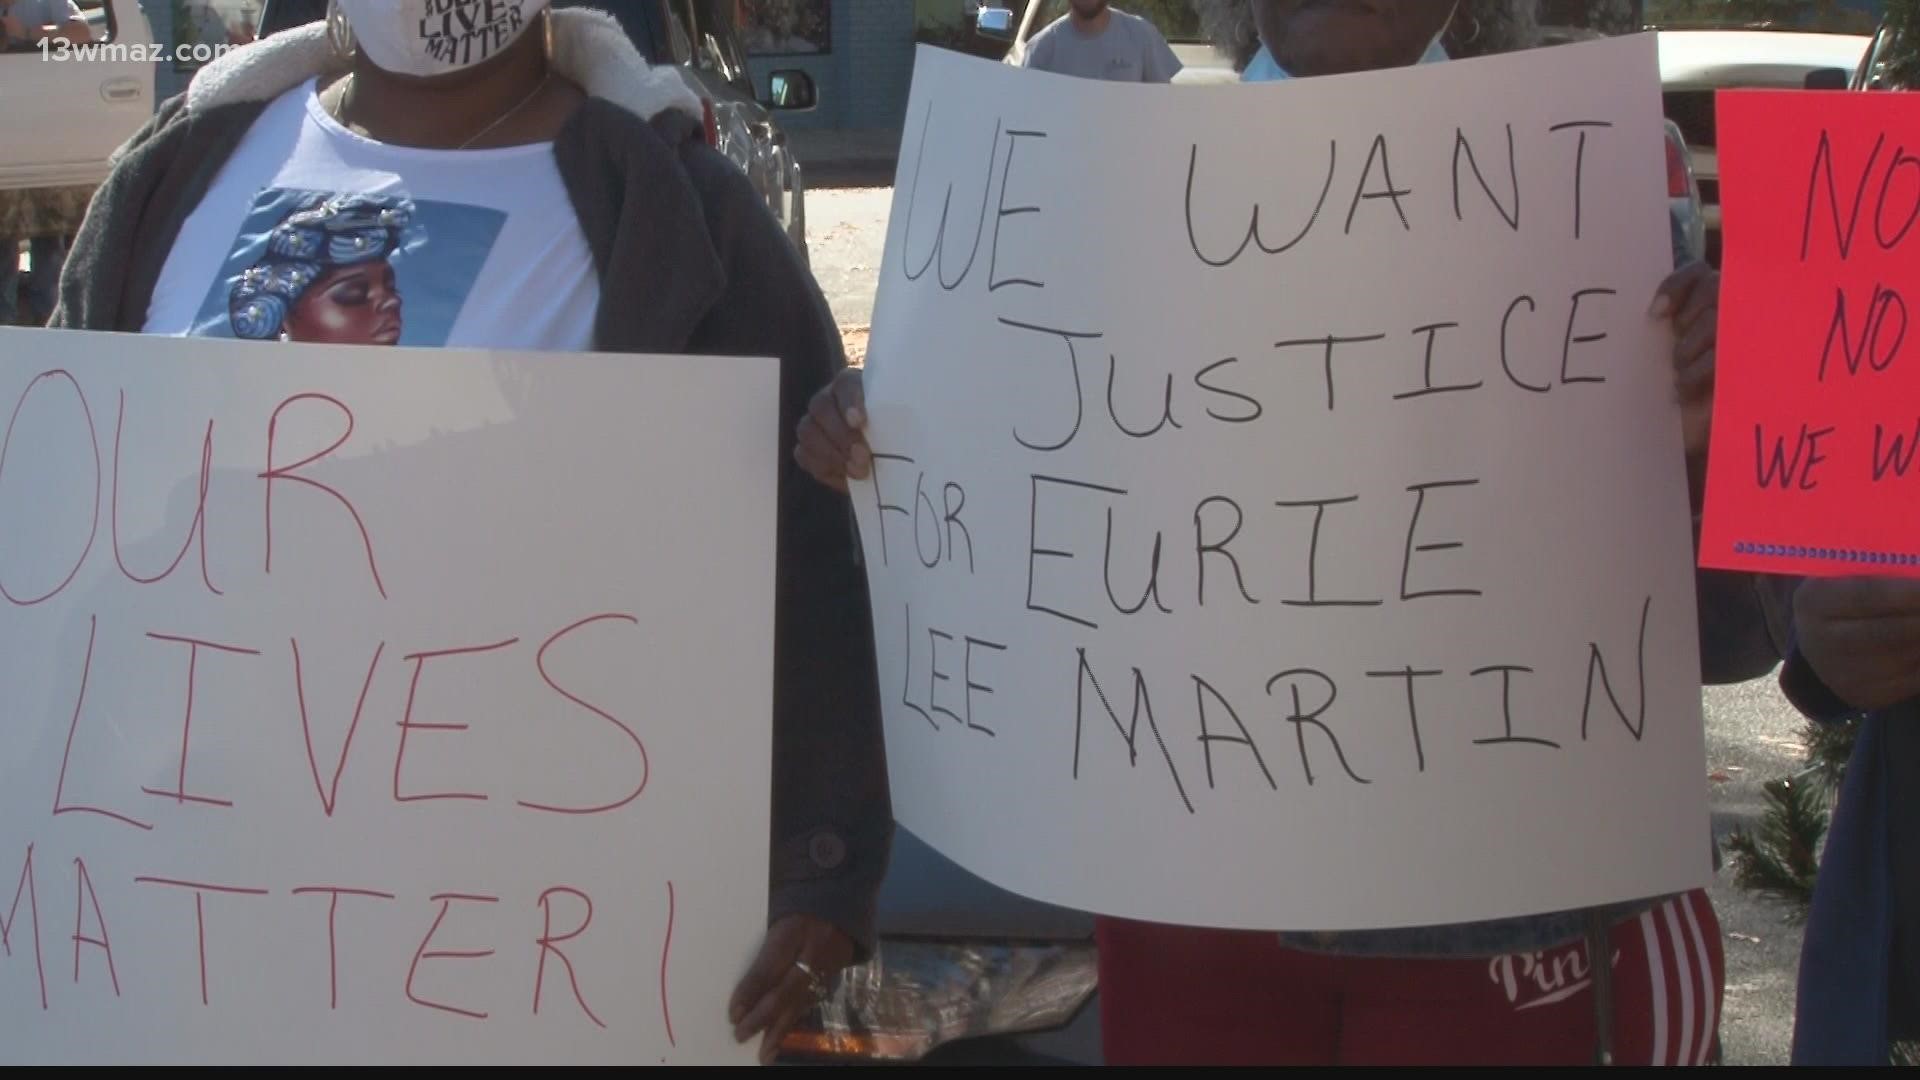 After a mistrial was declared in the murder trial against 3 ex-Washington County deputies accused of Tasing Eurie Martin to death, community rallied in his name